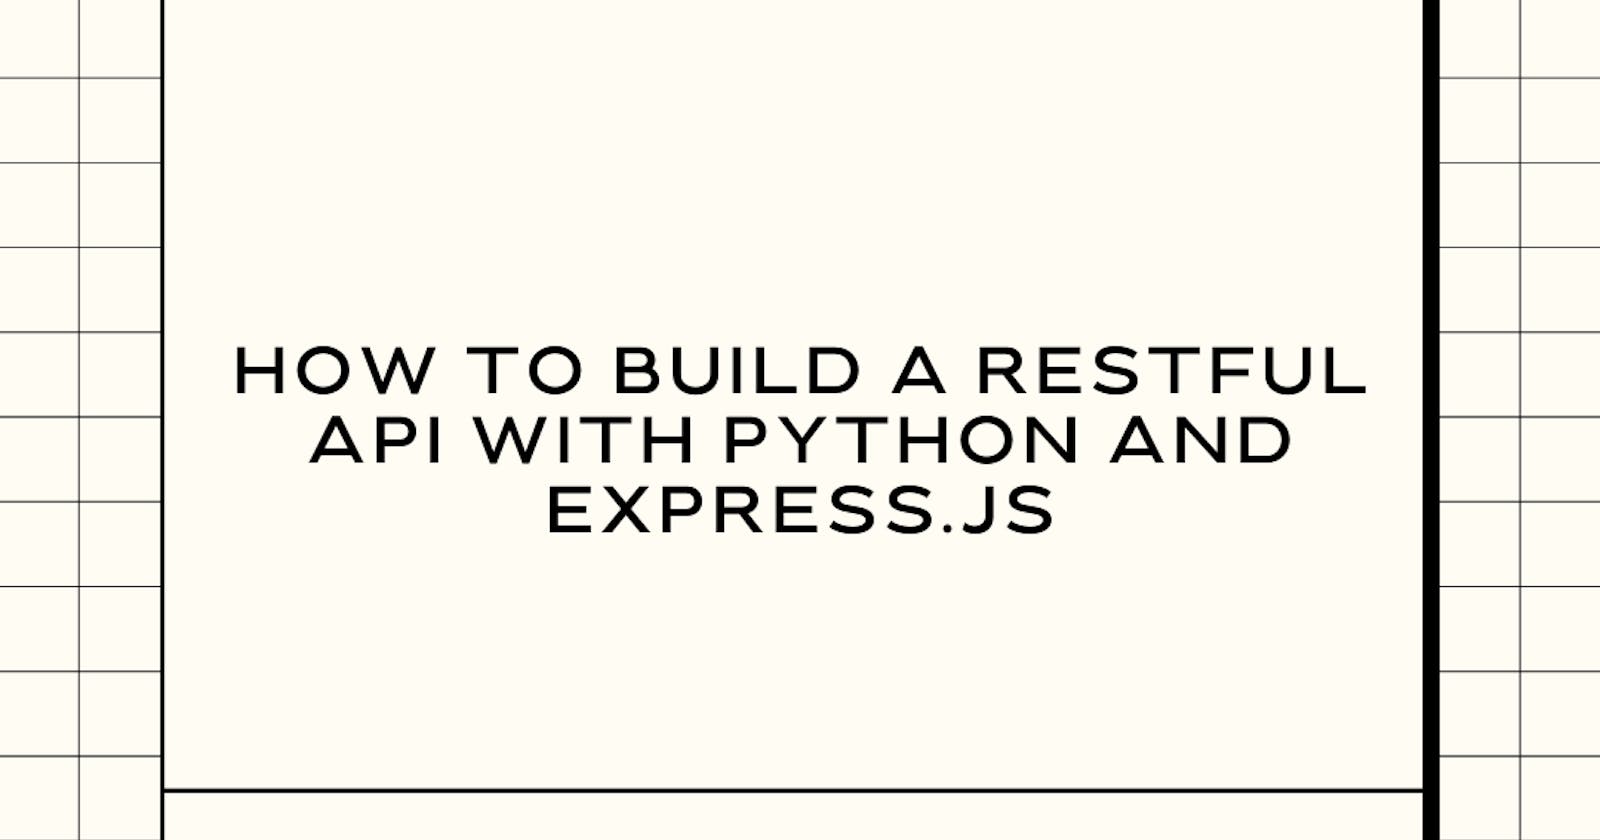 How to build a RESTful API with Python and Express.js